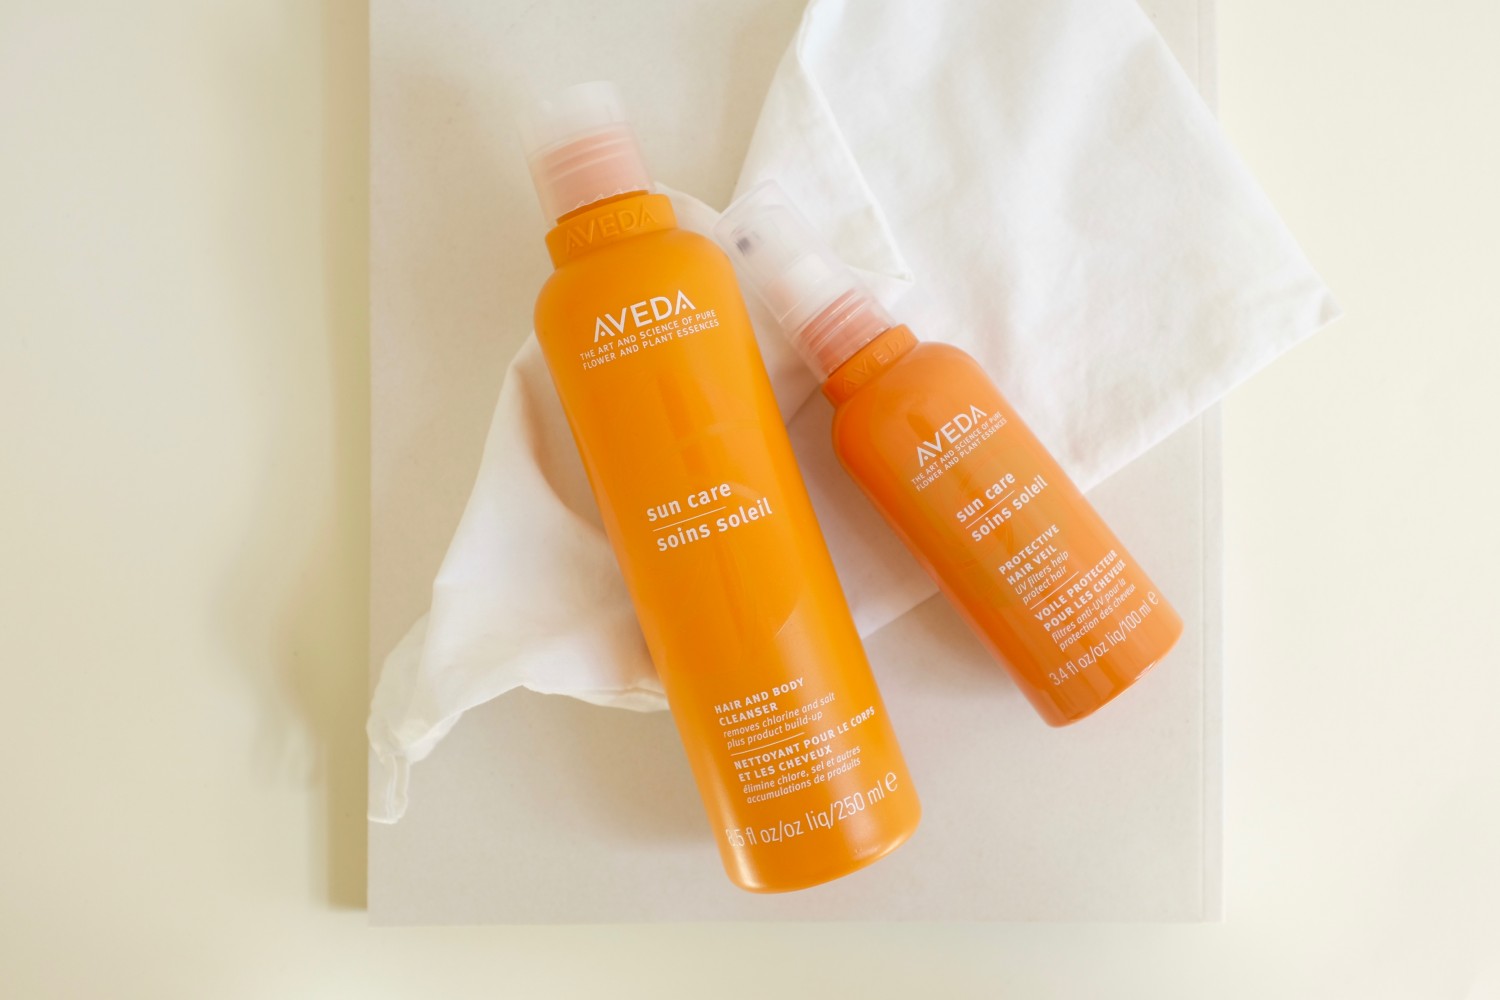 Summer-Proof Your Hair - don’t get stressed-out strands - wear a protective hair veil and treat your hair to Aveda’s after sun hair and body cleanser